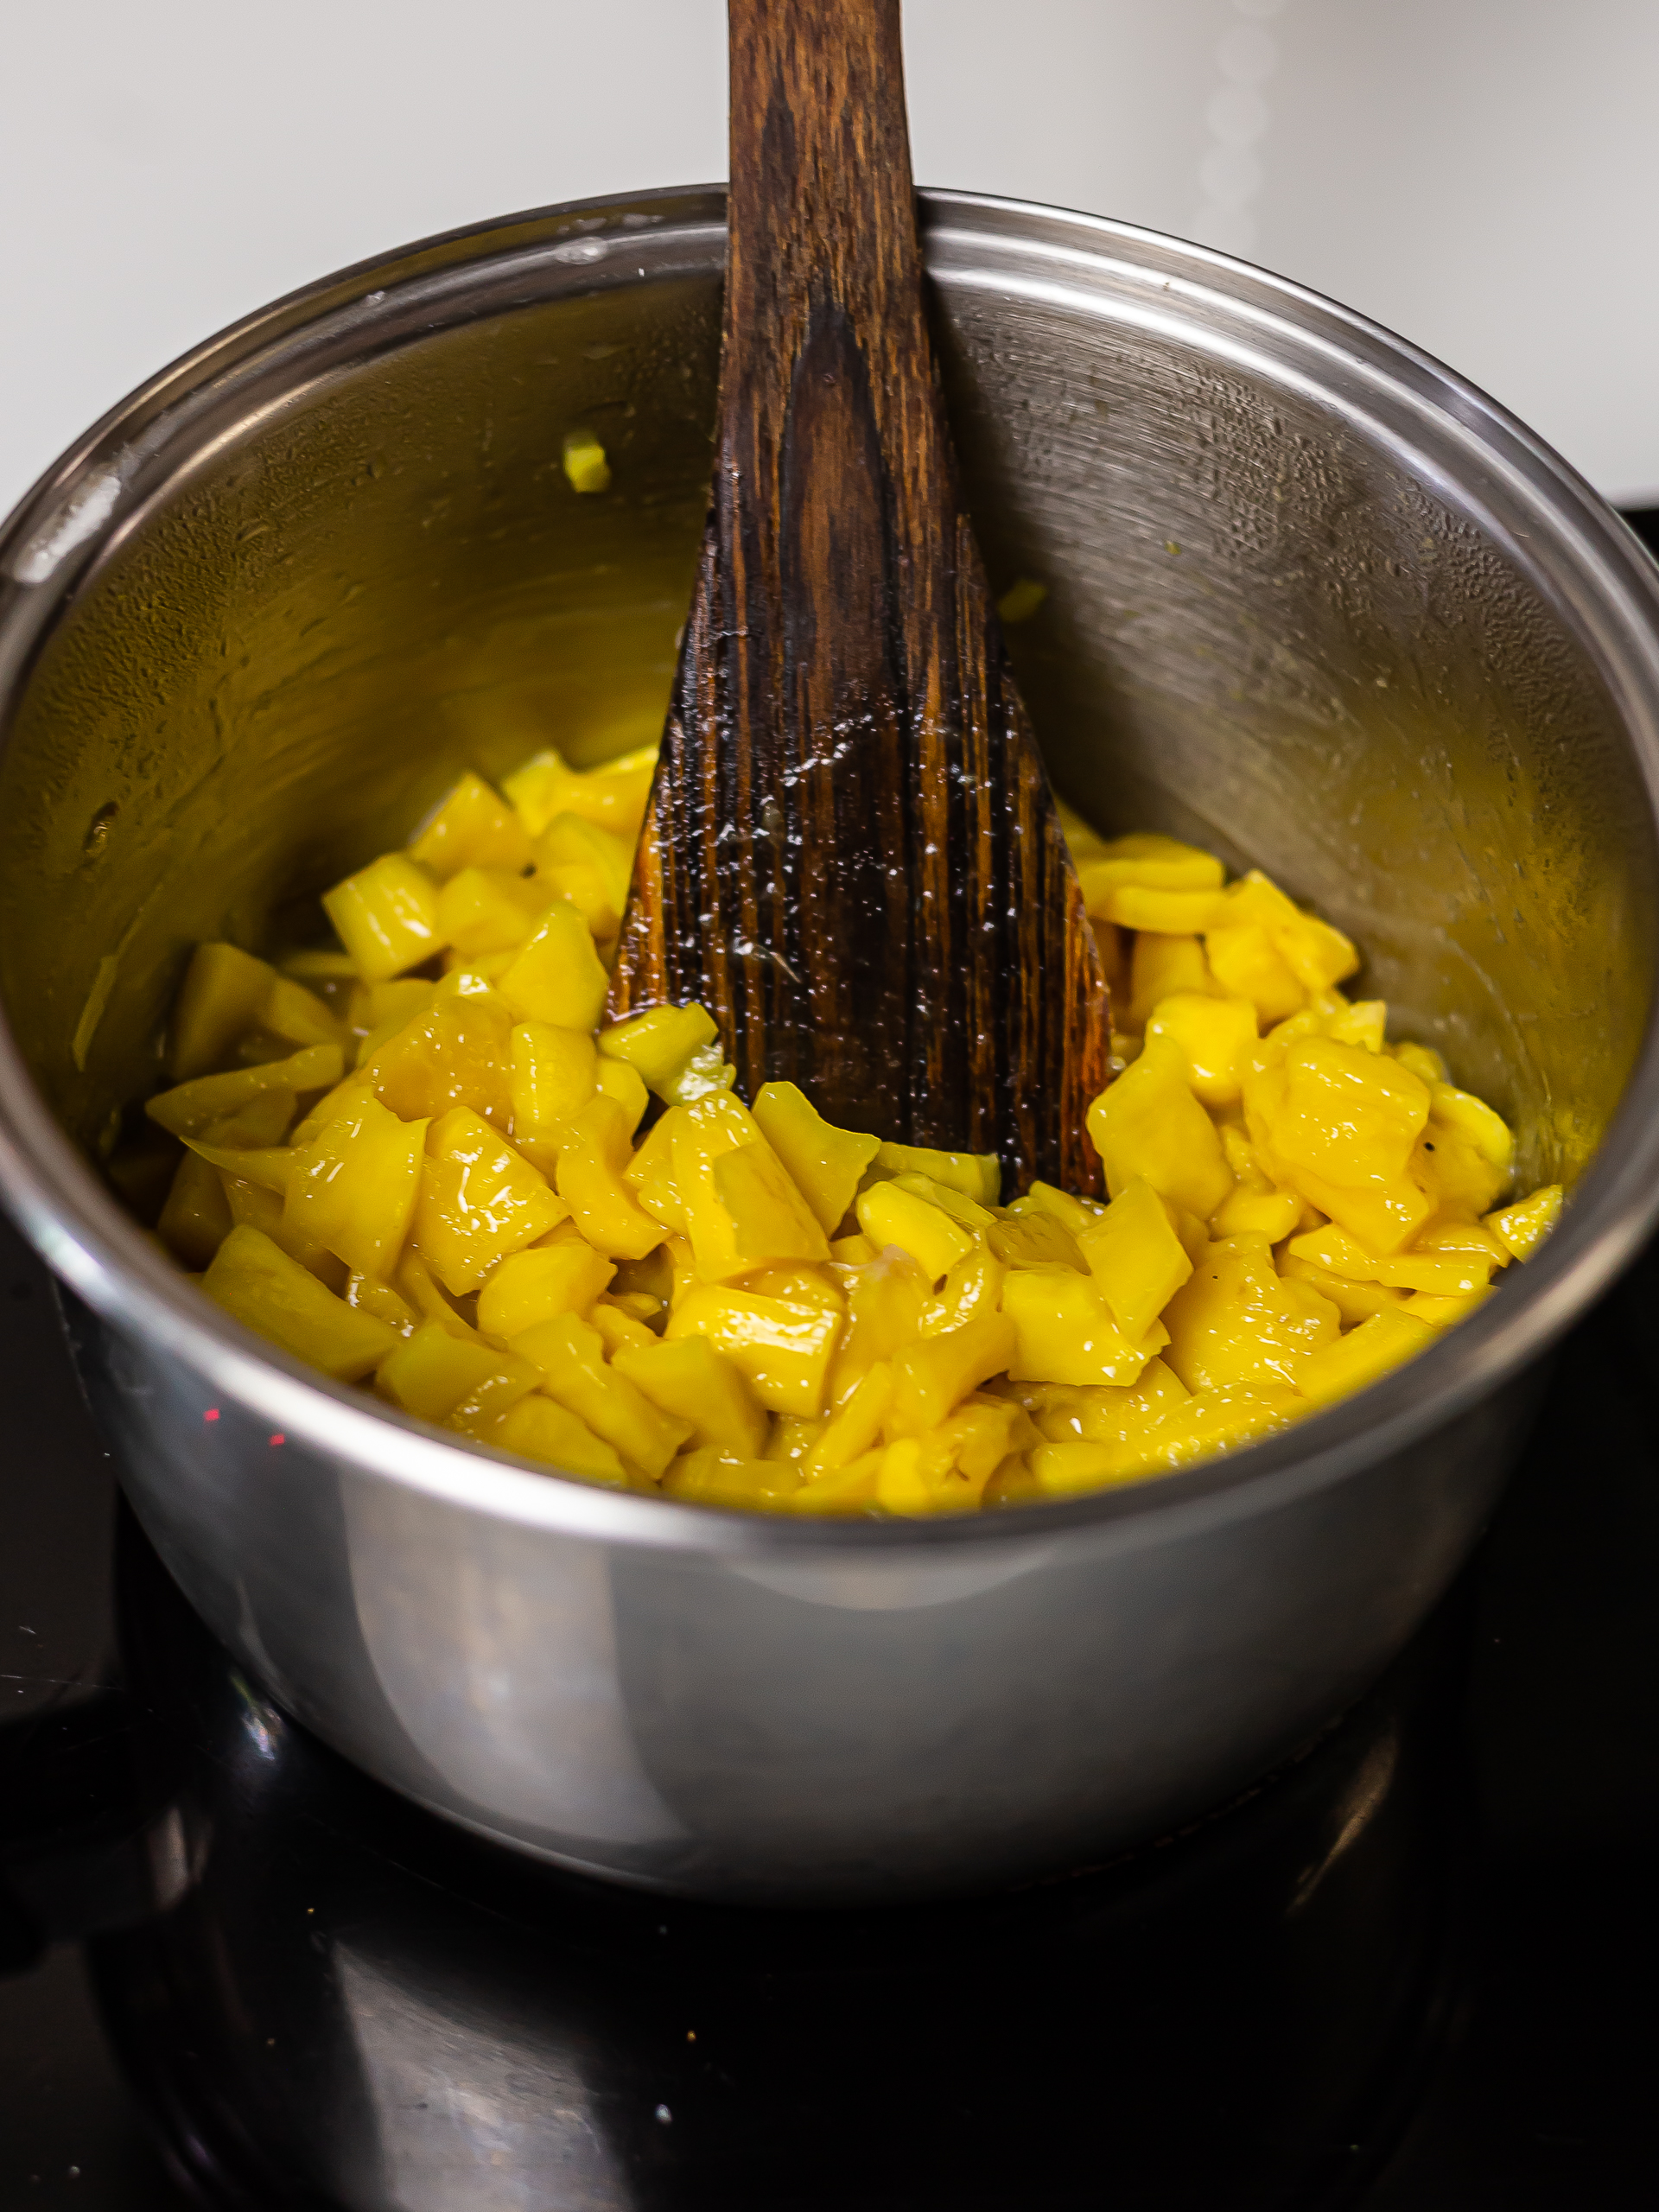 jackfruit pieces cooking in a pot for jam